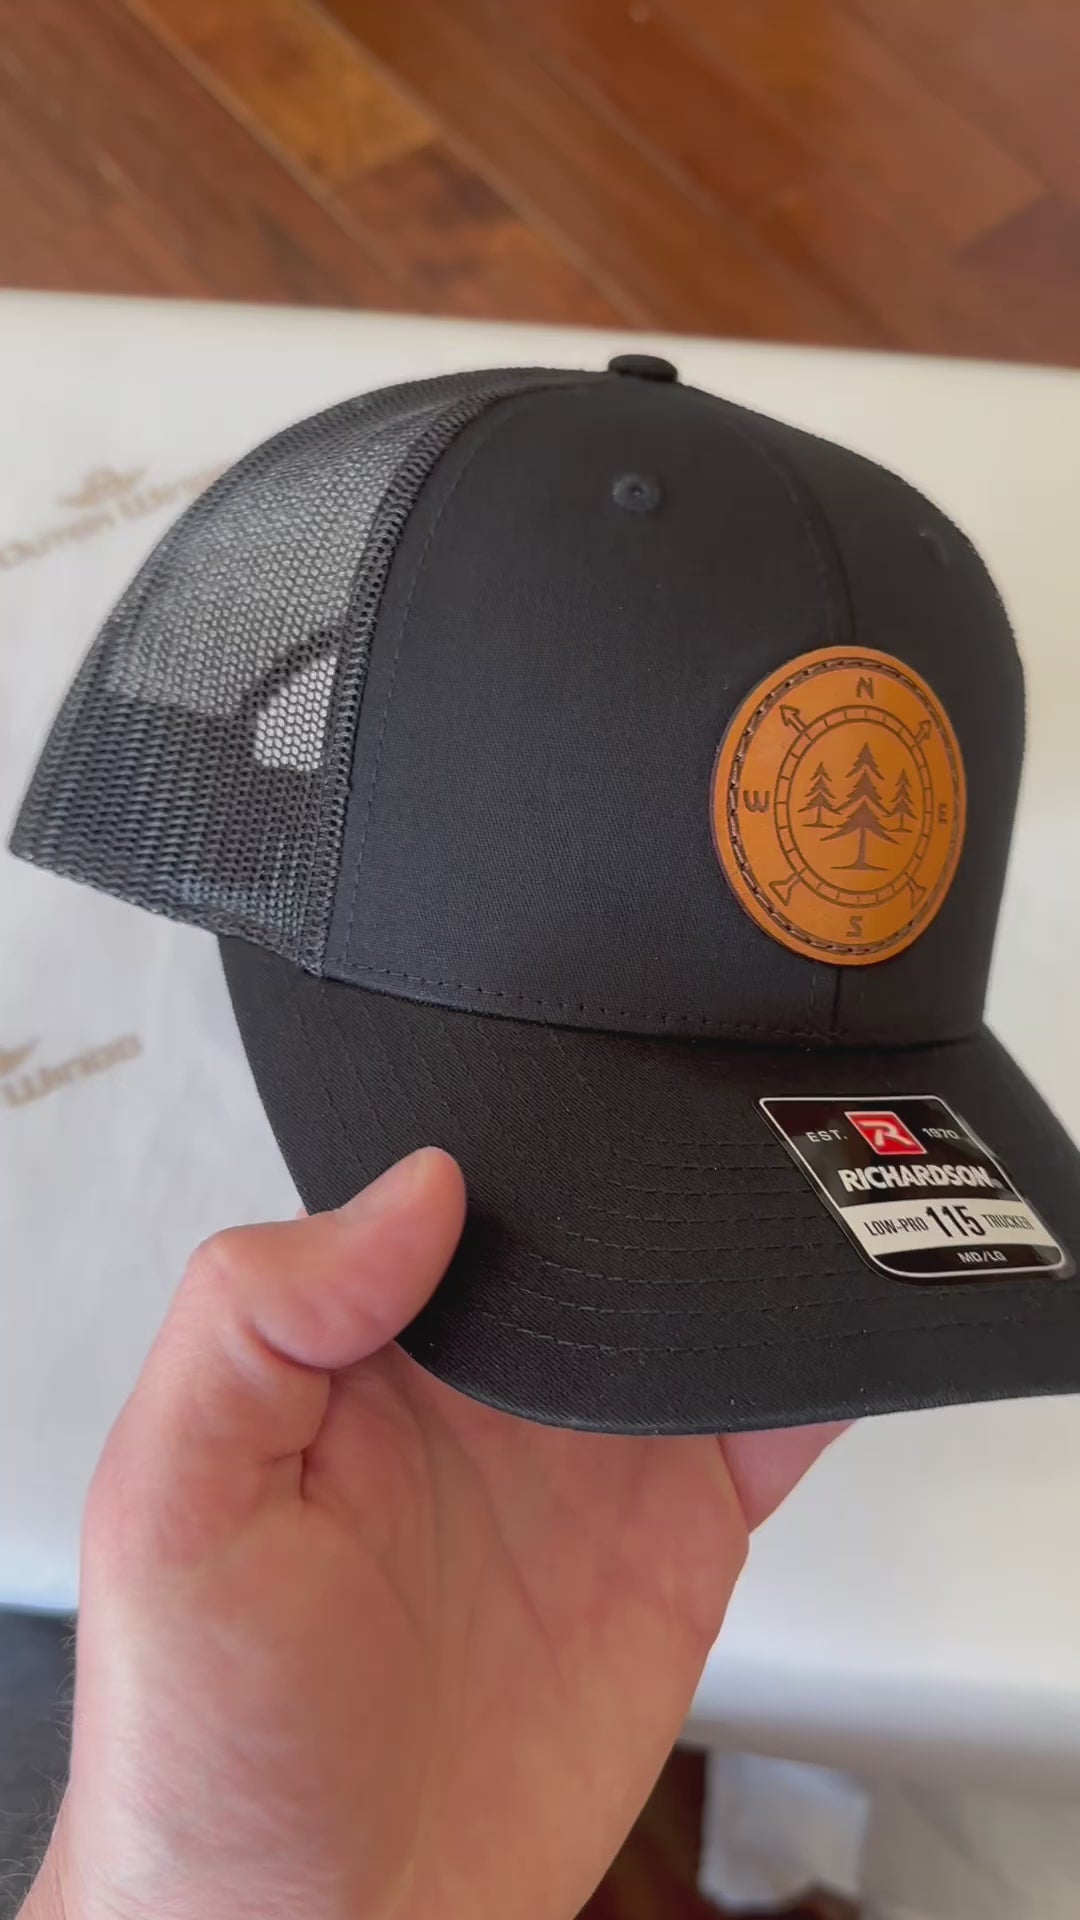 A premium custom leather patch hat named Lost Pines, showcasing a distinctive compass and pine trees design on a circle patch. Handcrafted in the USA, this unique hat features authentic leather stitching on a Richardson 115 low profile SnapBack hat. Available in small and m/l sizes in a variety of colors, this hat is inspired by the scenic mountains of Colorado. Perfect for hat enthusiasts seeking high-quality custom leather patch designs.